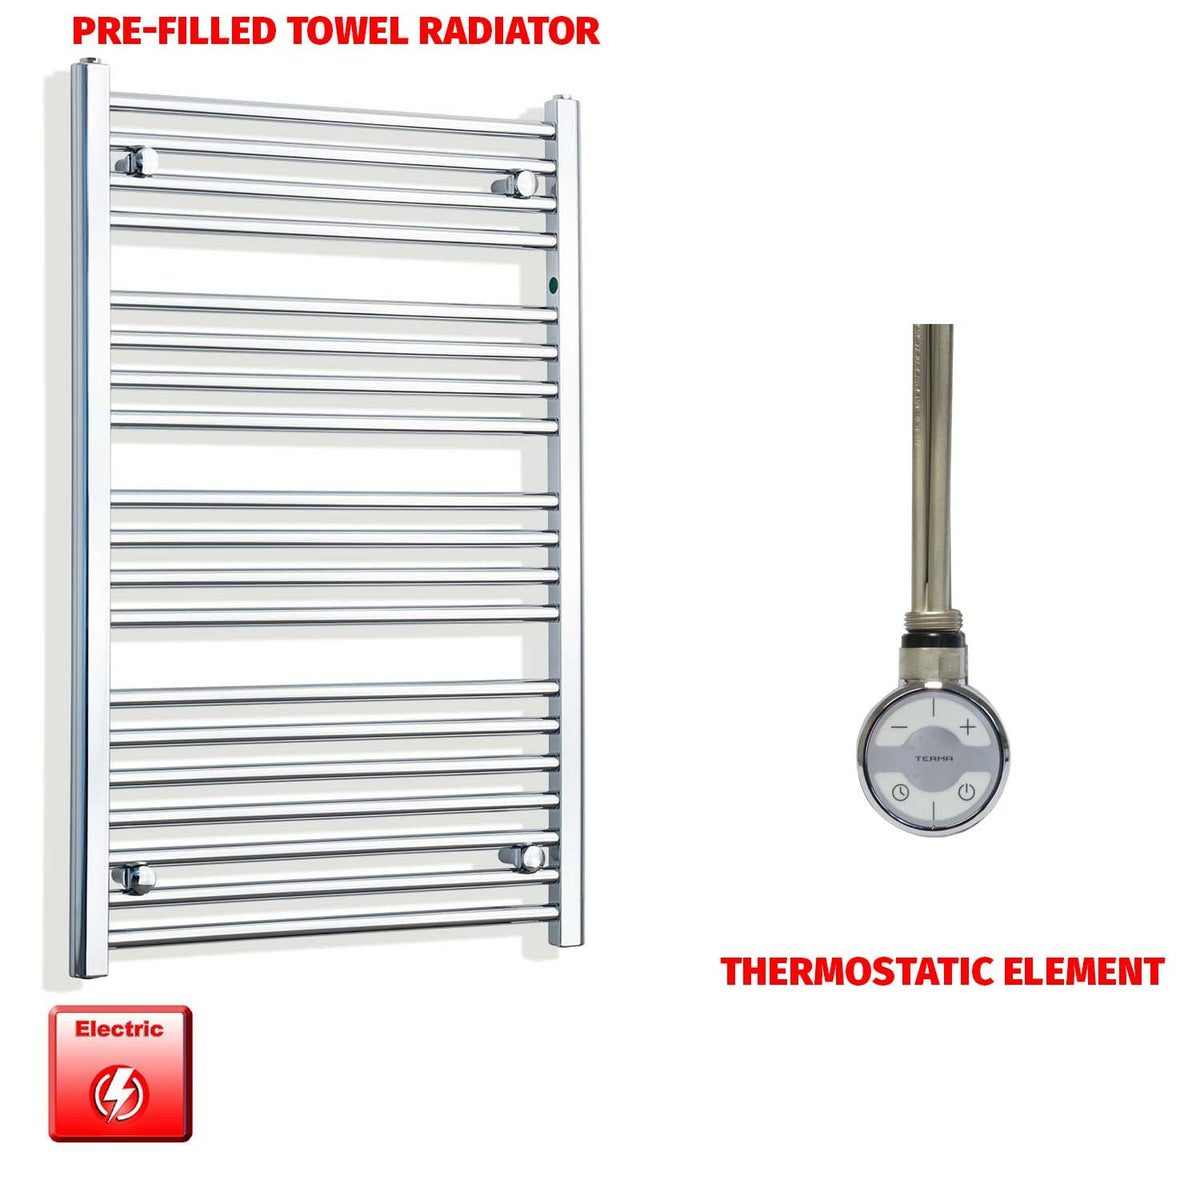 1000mm High 550mm Wide Pre-Filled Electric Heated Towel Radiator Chrome HTR MOA Thermostatic element no timer